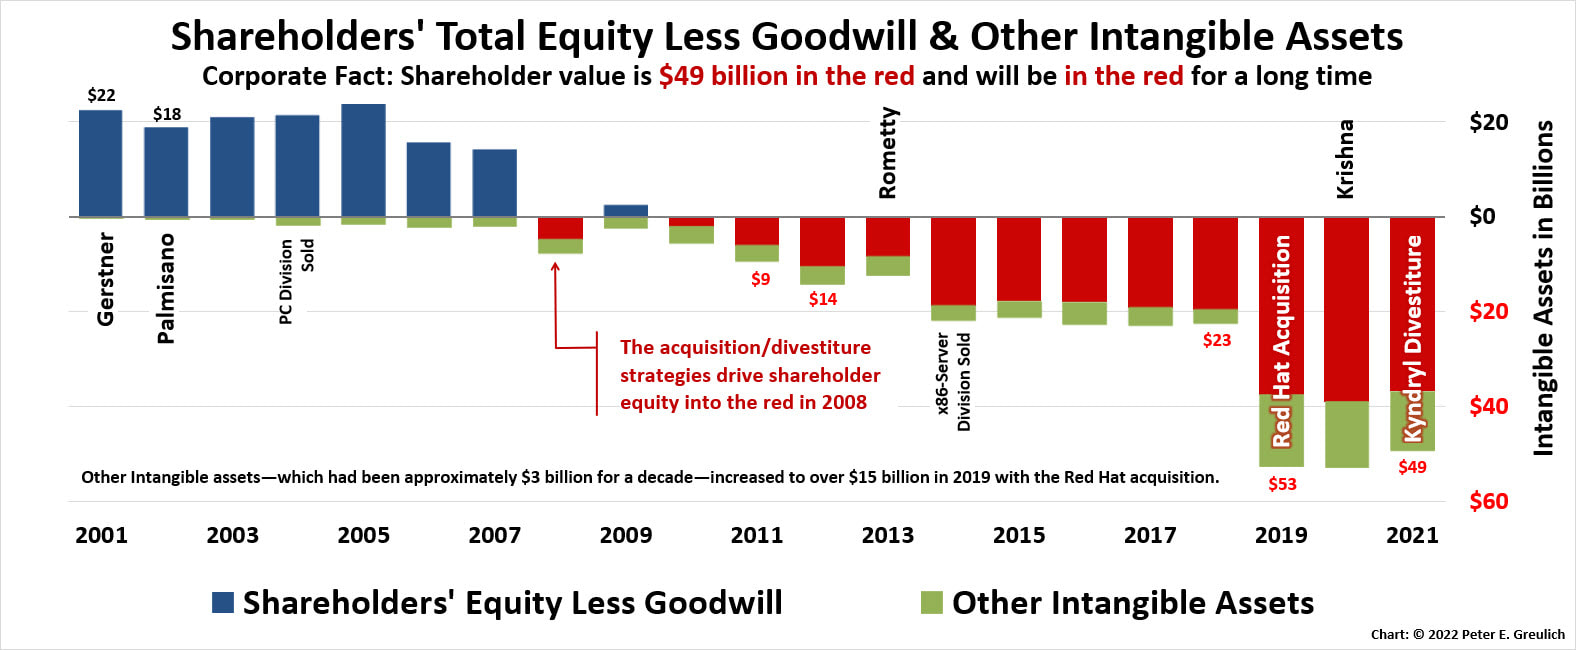 A bar chart showing IBM Shareholders' Total Equity Less Goodwill and all Intangible Assets from 2001 to 2020.